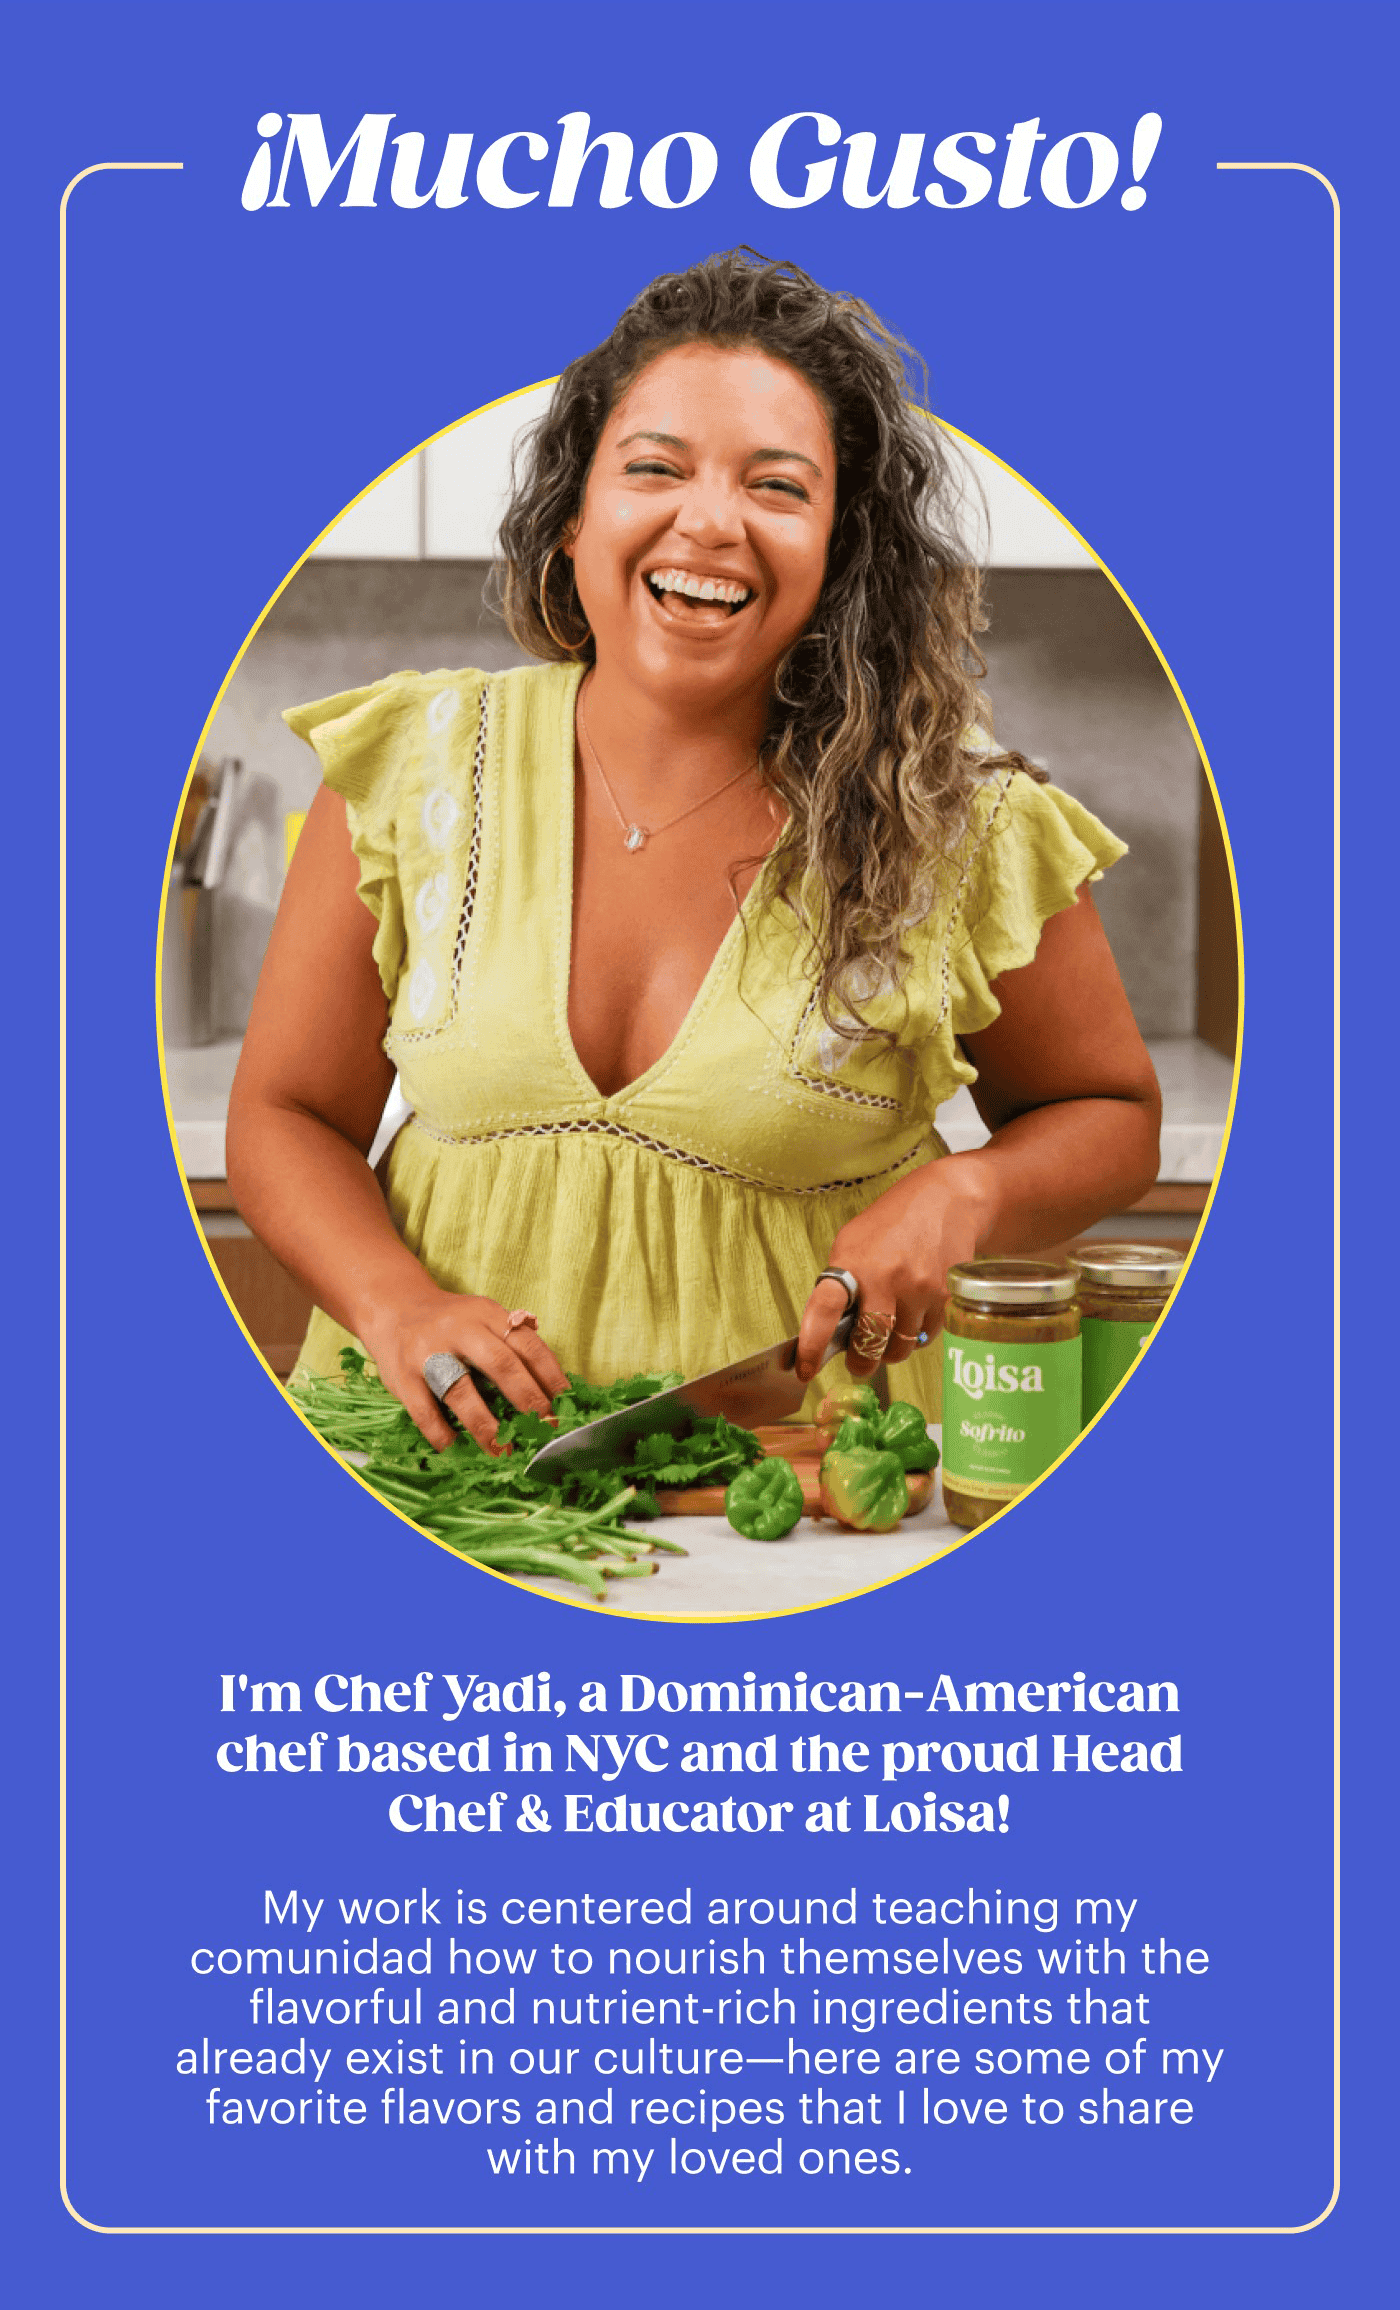 ¡Mucho Gusto! I'm Chef Yadi, a Dominican-American chef based in NYC and the proud Head Chef & Educator at Loisa! My work is centered around teaching my comunidad how to nourish themselves with the flavorful and nutrient-rich ingredients that already exist in our culture—here are some of my favorite flavors and recipes that I love to share with my loved ones.